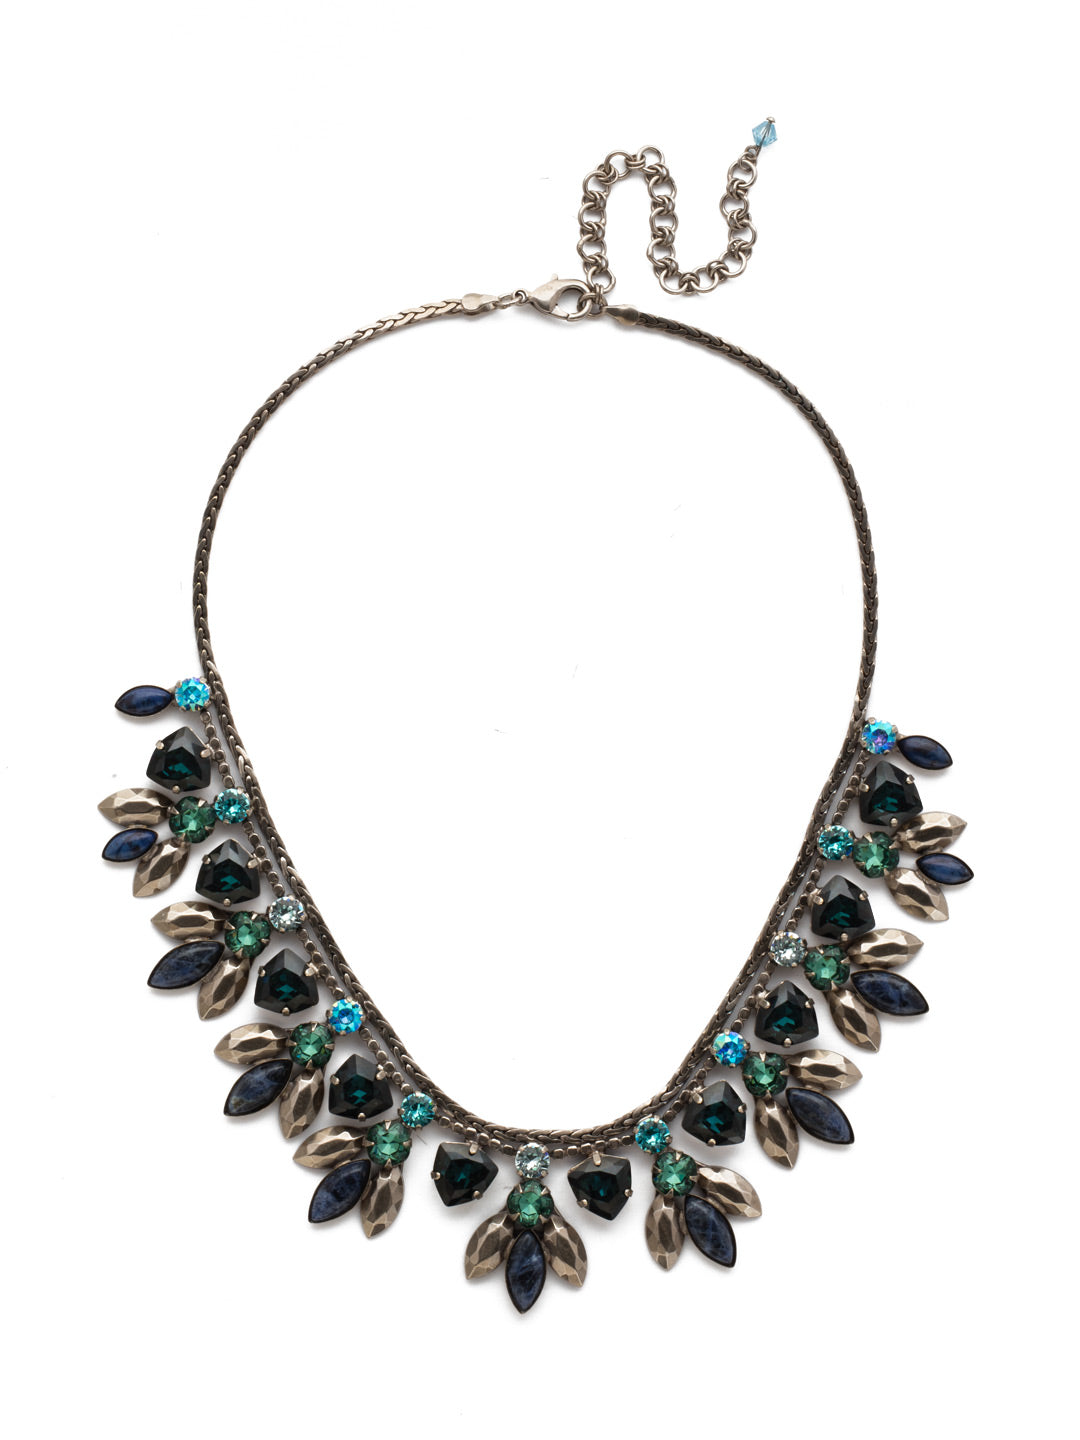 Euphorbia Necklace - NDX5ASBSD - <p>A row of shield shaped crystals and nature-inspired stone clusters is attached to a braided metal chain for all-around allure. From Sorrelli's Blue Suede collection in our Antique Silver-tone finish.</p>